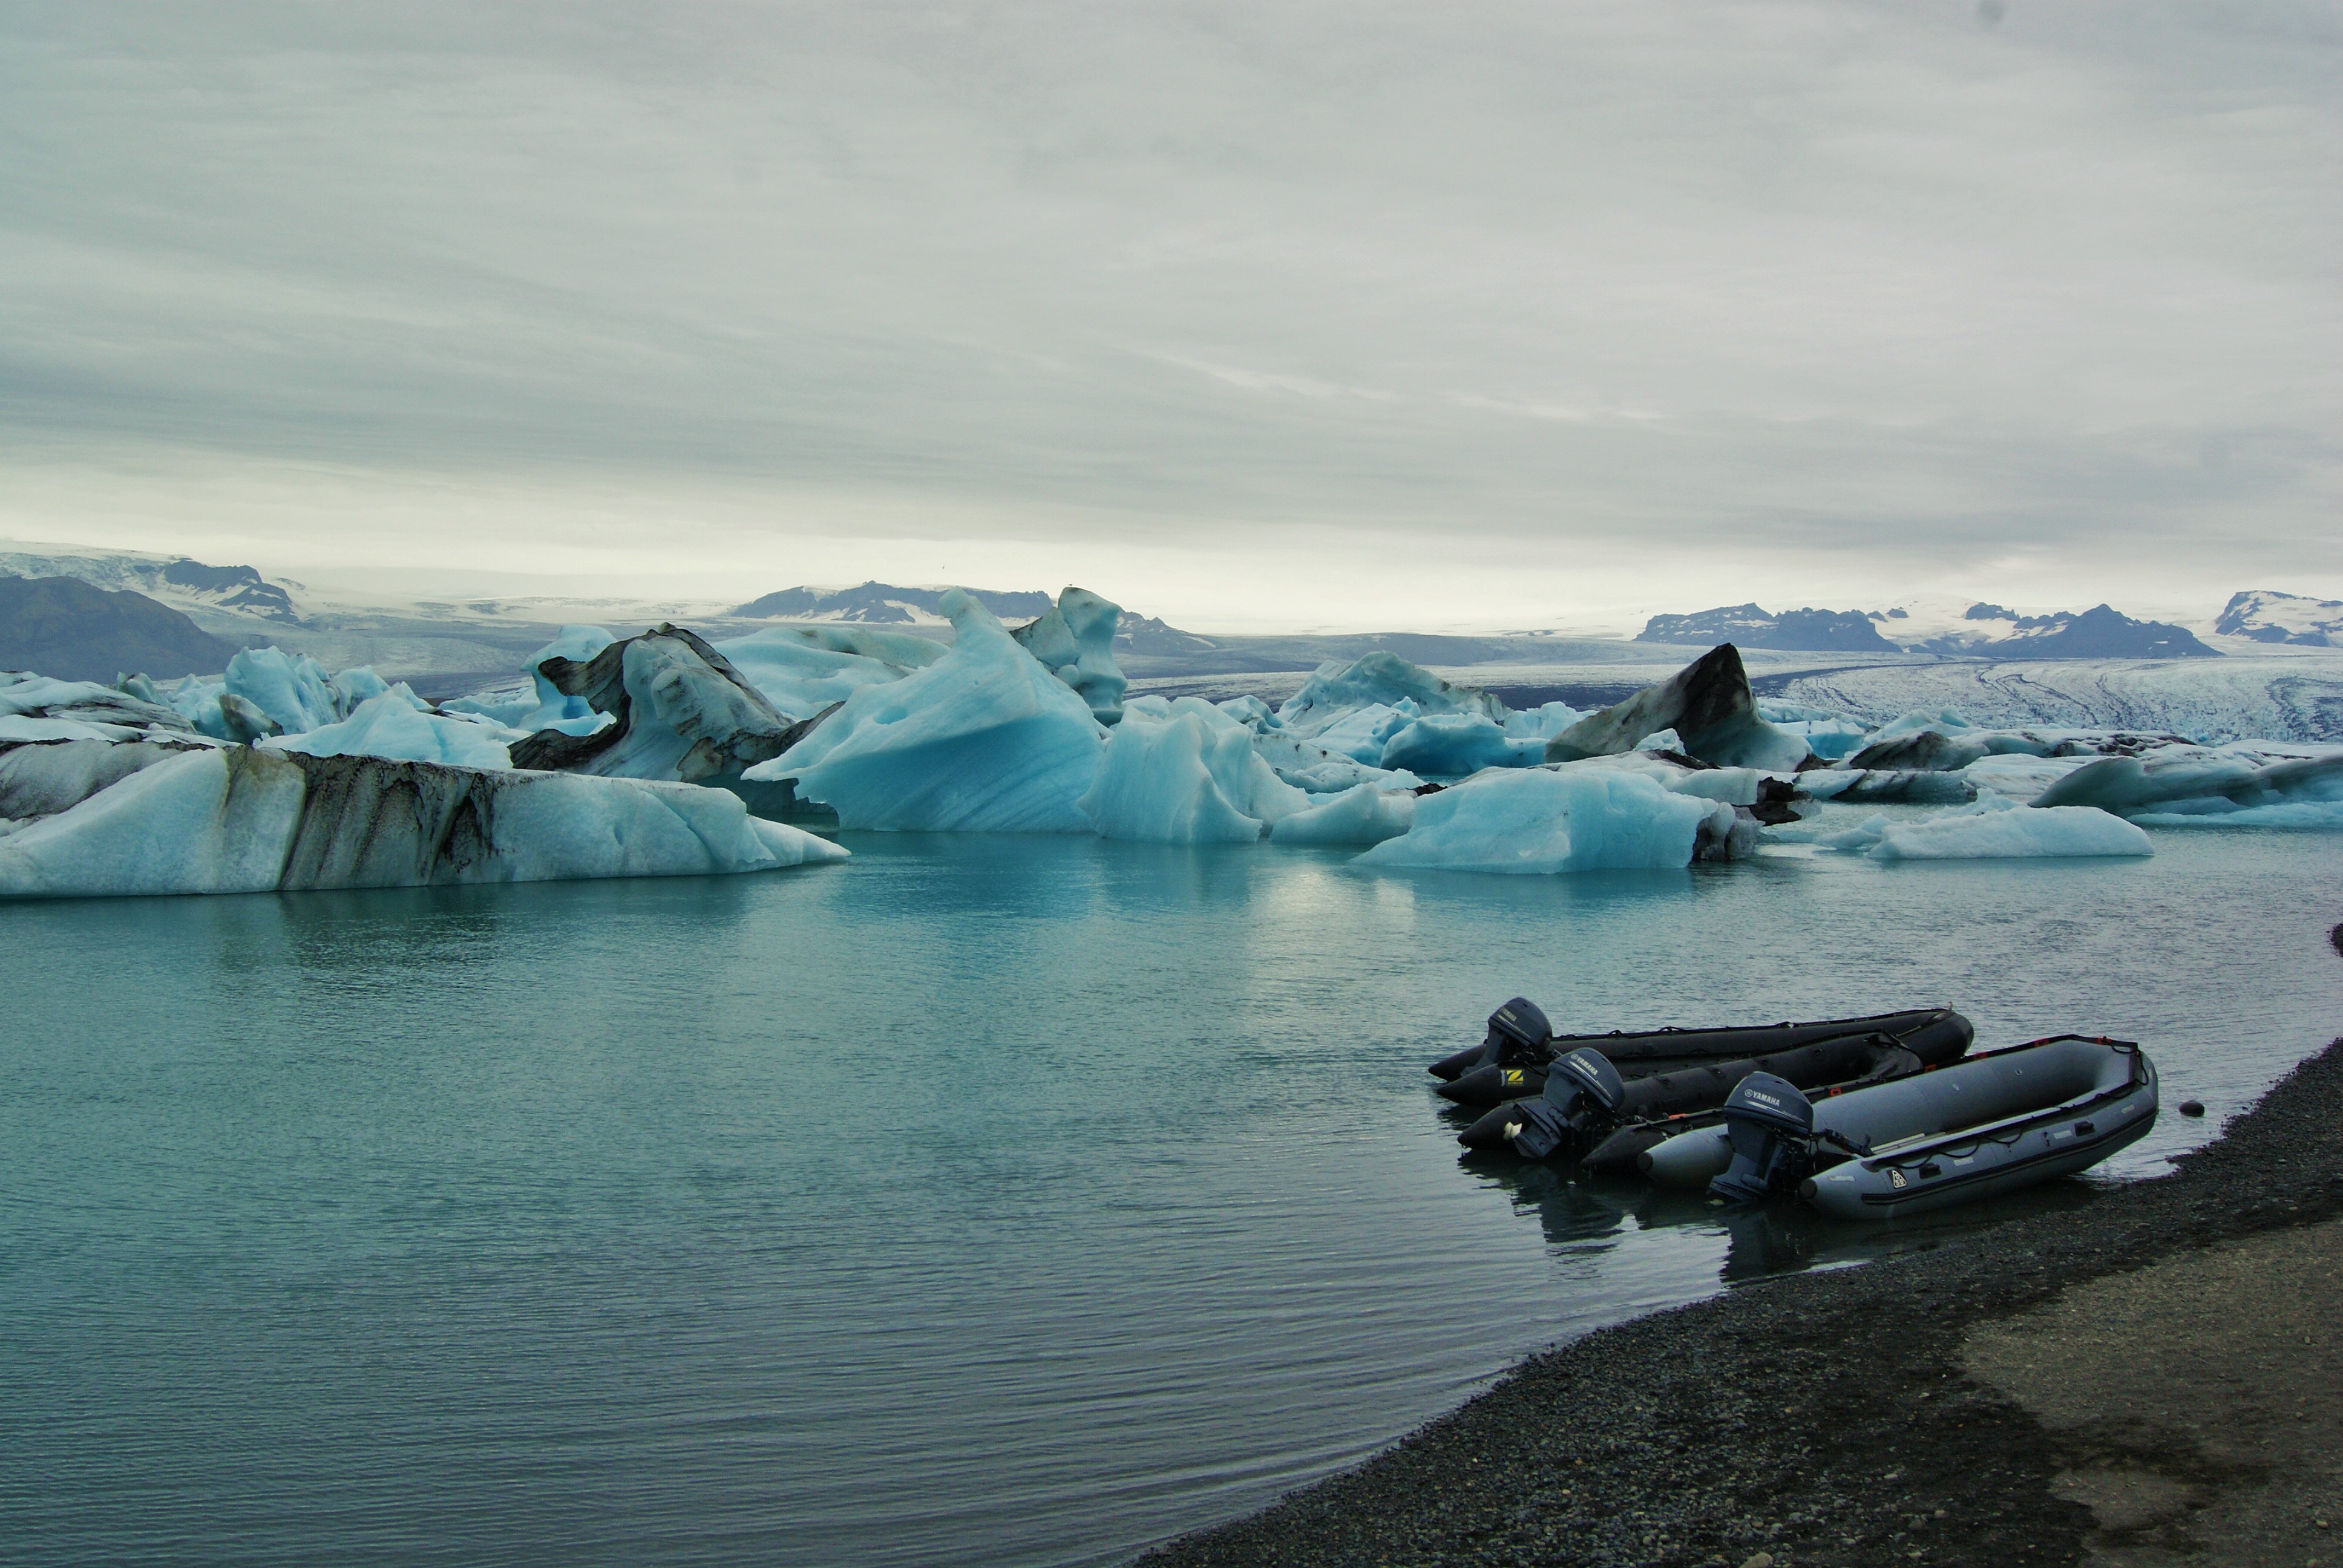 Jökulsárlón lagoon can be visited on a boat trip, or eyed from the shore. Image by Heather Carswell / Lonely Planet